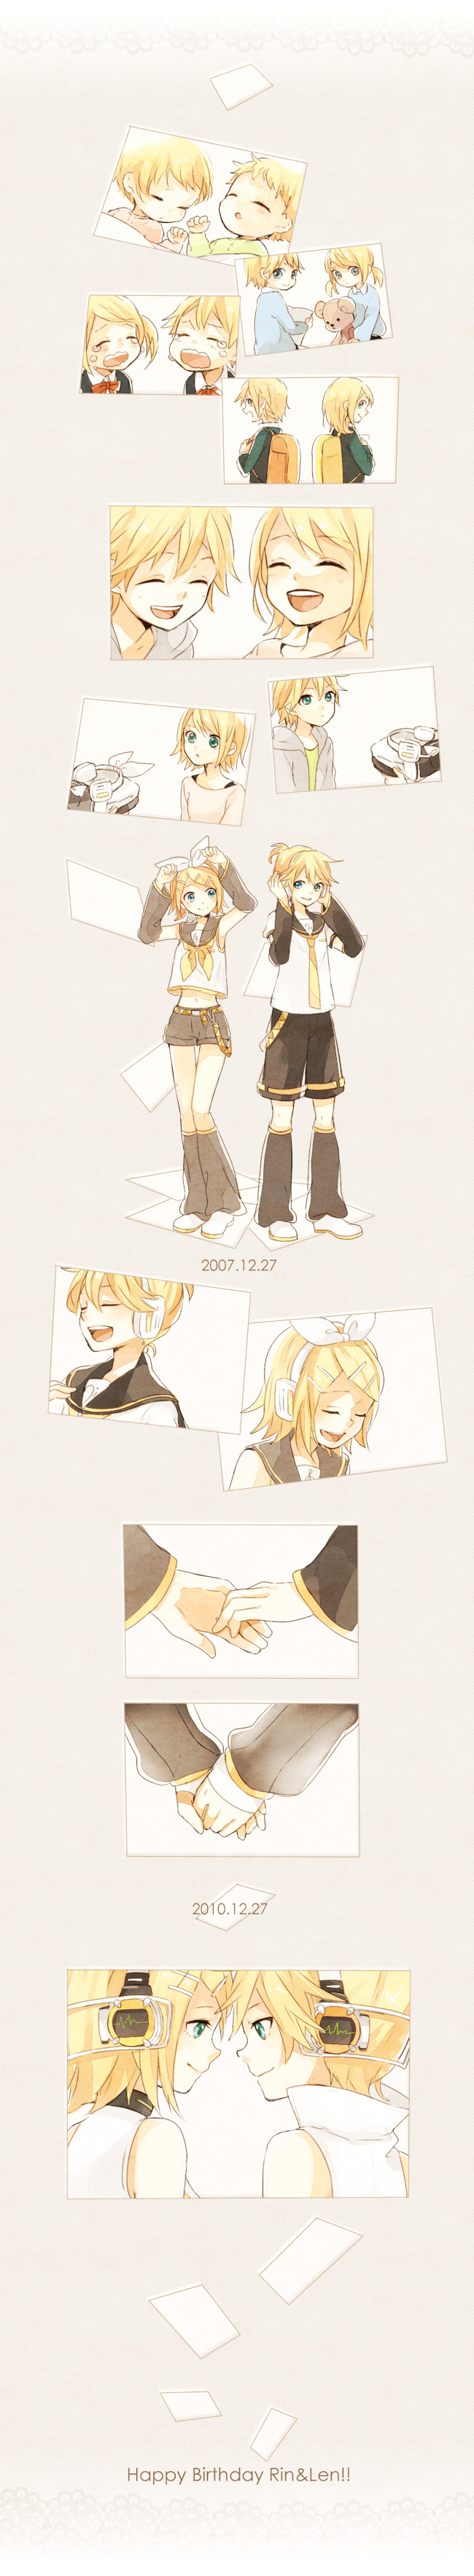 1girl absurdres age_progression baby birthday blonde_hair brother_and_sister child green_eyes hair_ornament hair_ribbon hairclip happy_birthday headphones highres holding_hands kagamine_len kagamine_len_(append) kagamine_rin kagamine_rin_(append) long_image ribbon short_hair siblings smile tall_image tama_(songe) tears twins vocaloid vocaloid_append younger